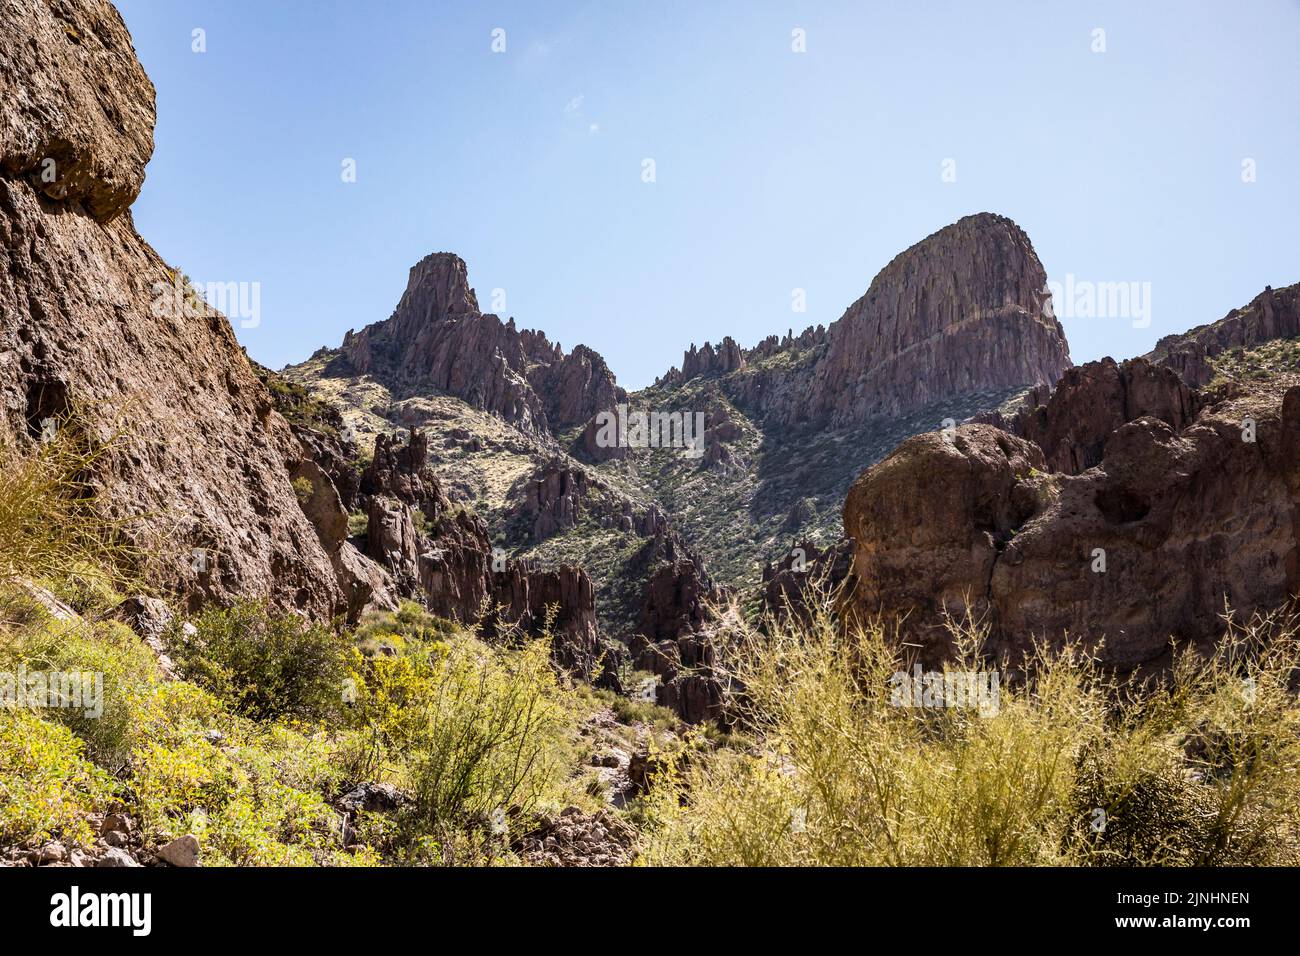 Steep rock formations in Siphon Draw, Lost Dutchman State Park, Arizona, USA. Stock Photo